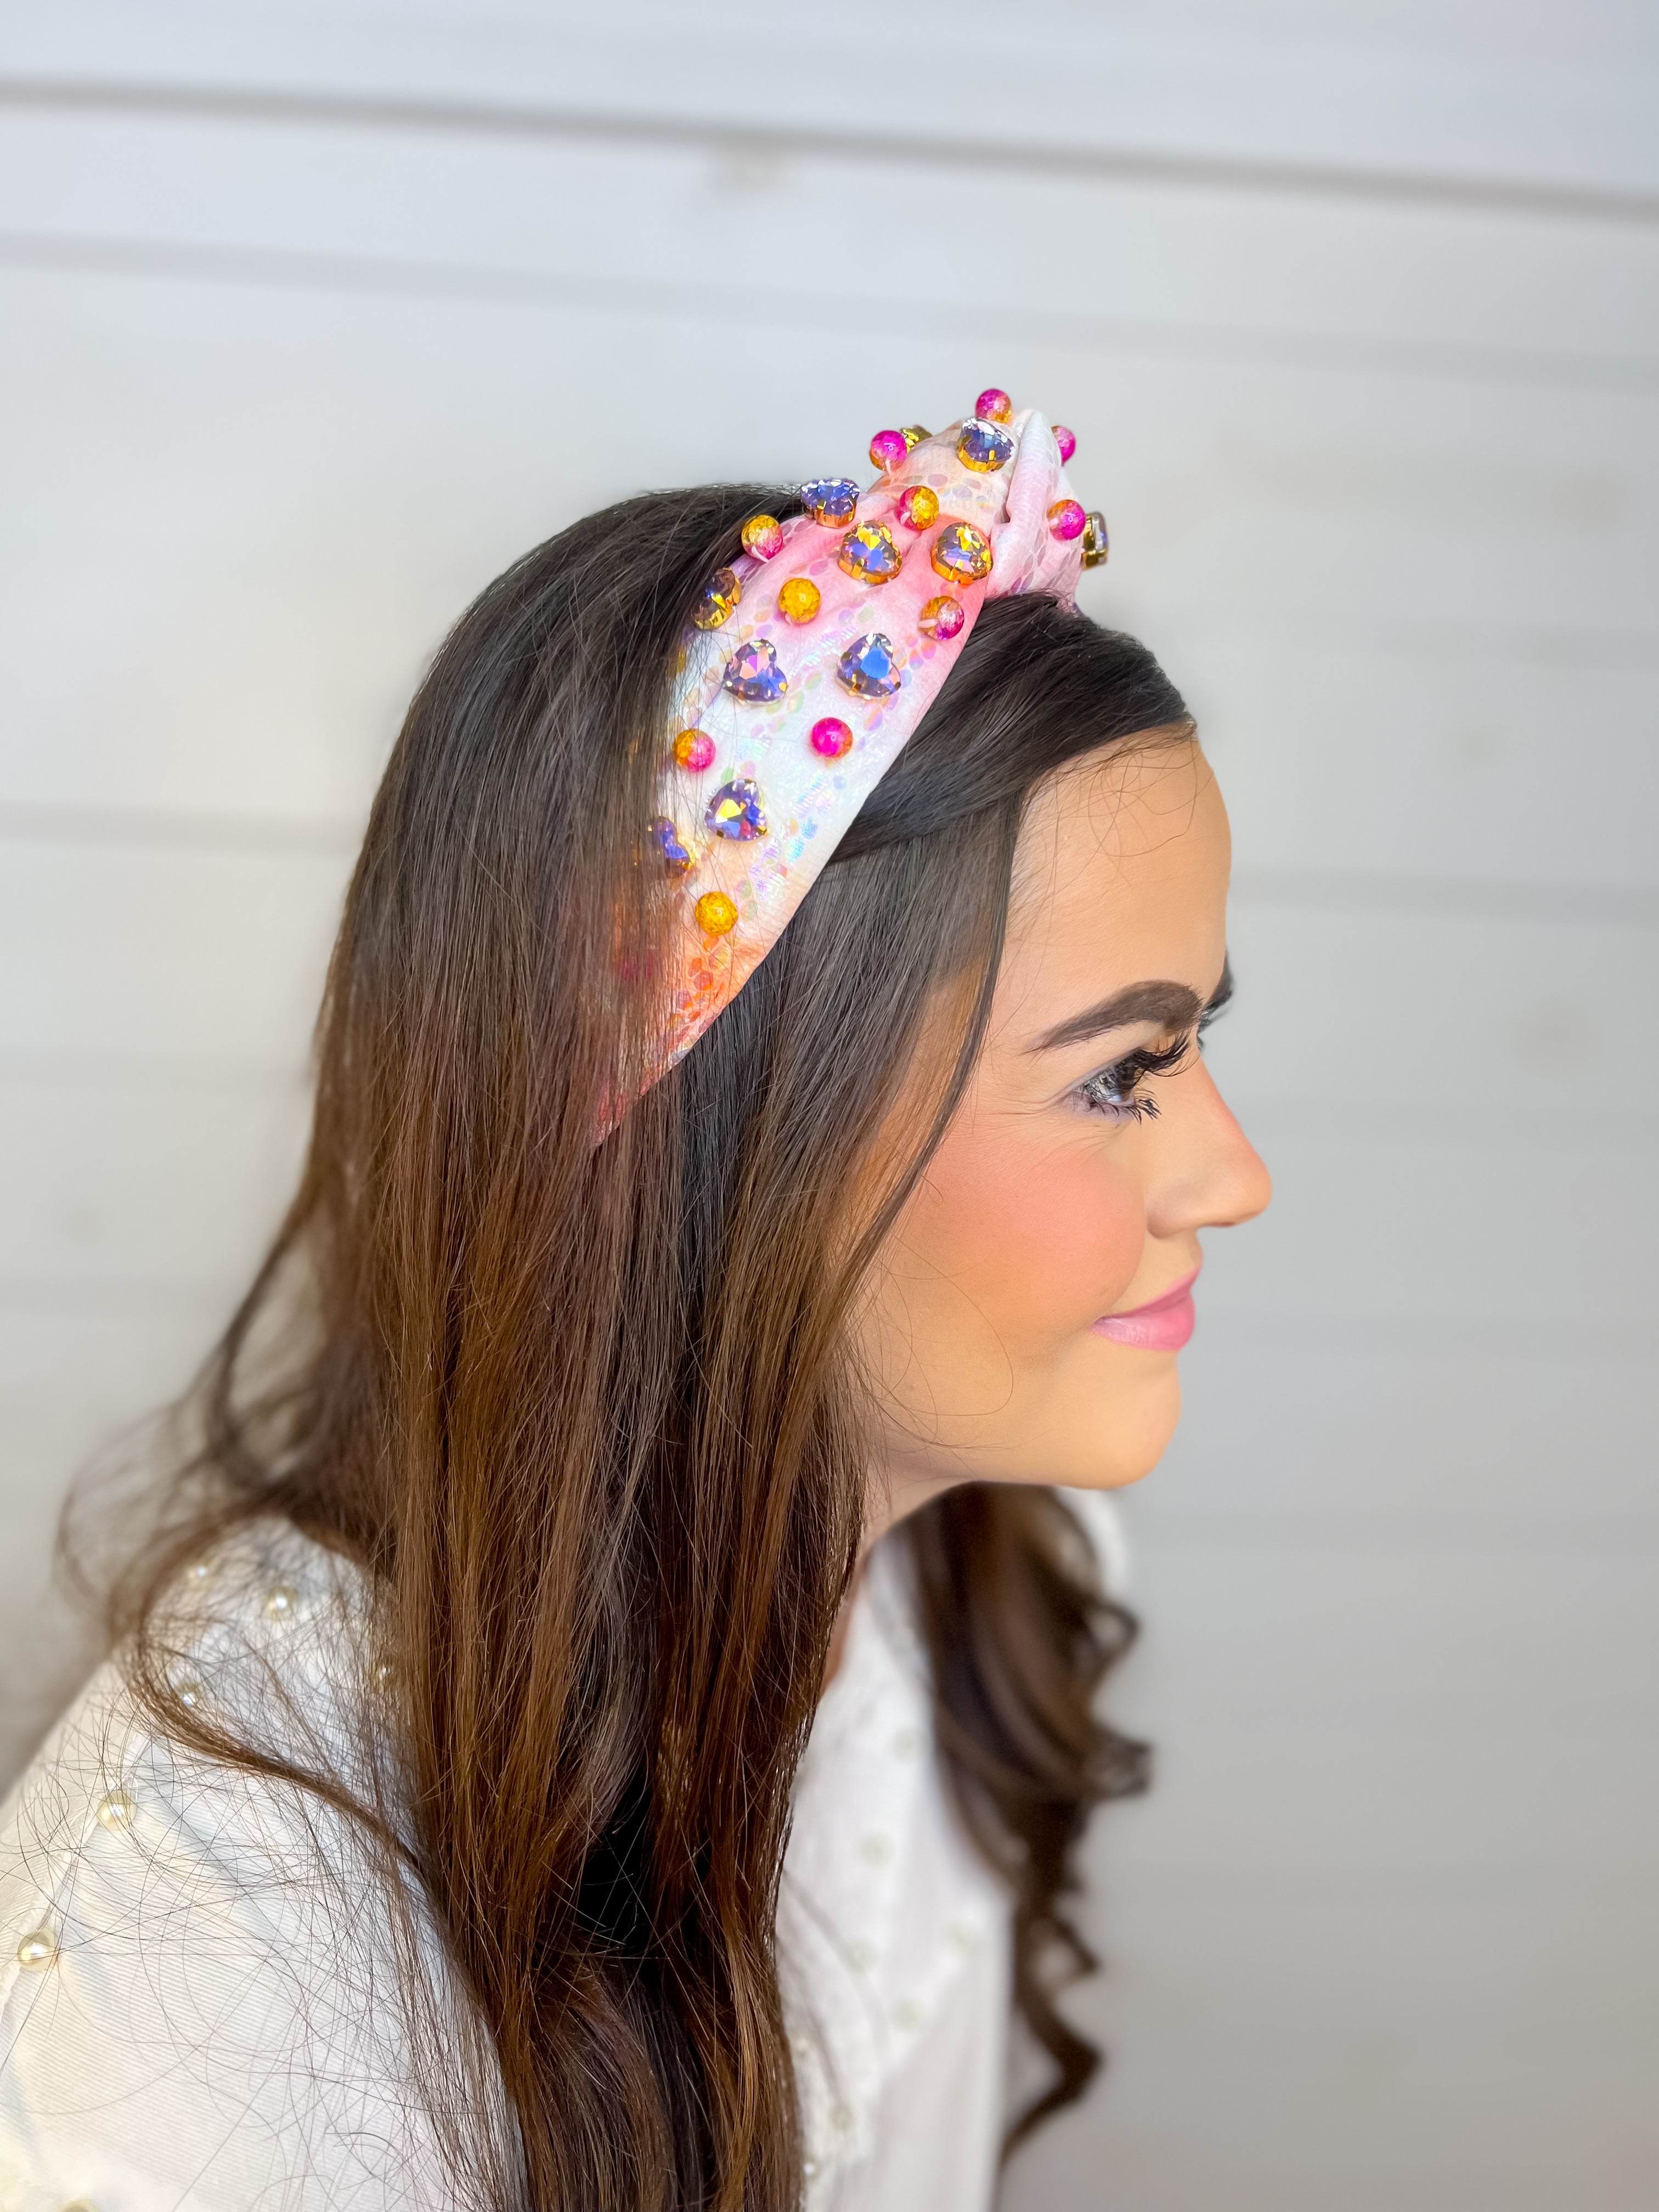 [Brianna Cannon] Pink Ombre Headband With Hearts/Beads